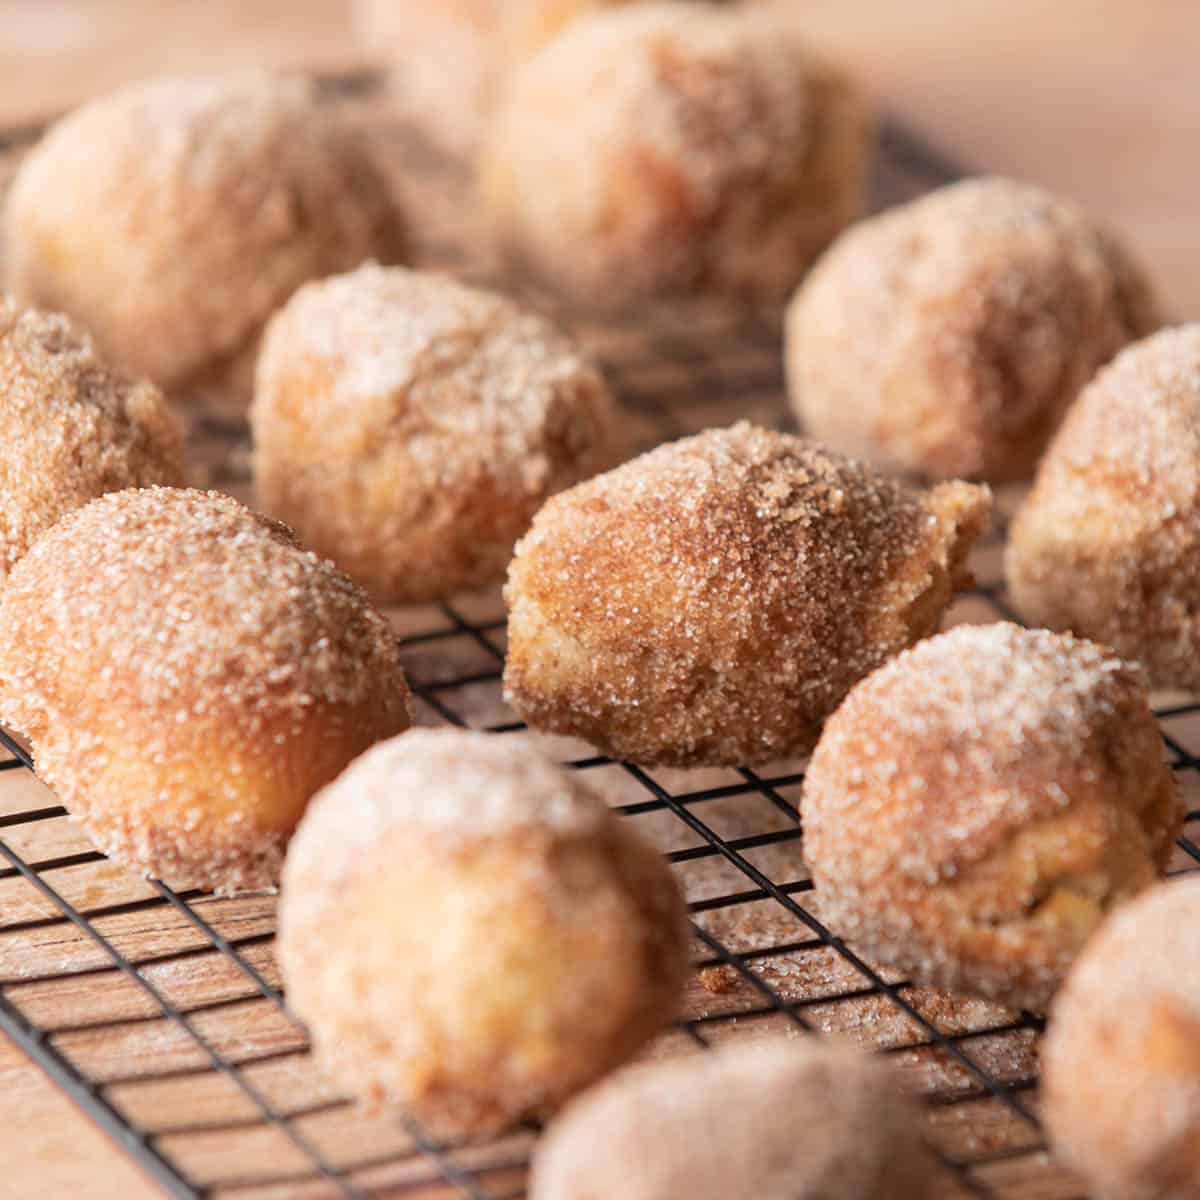 Donut holes covered with cinnamon sugar on wire rack.